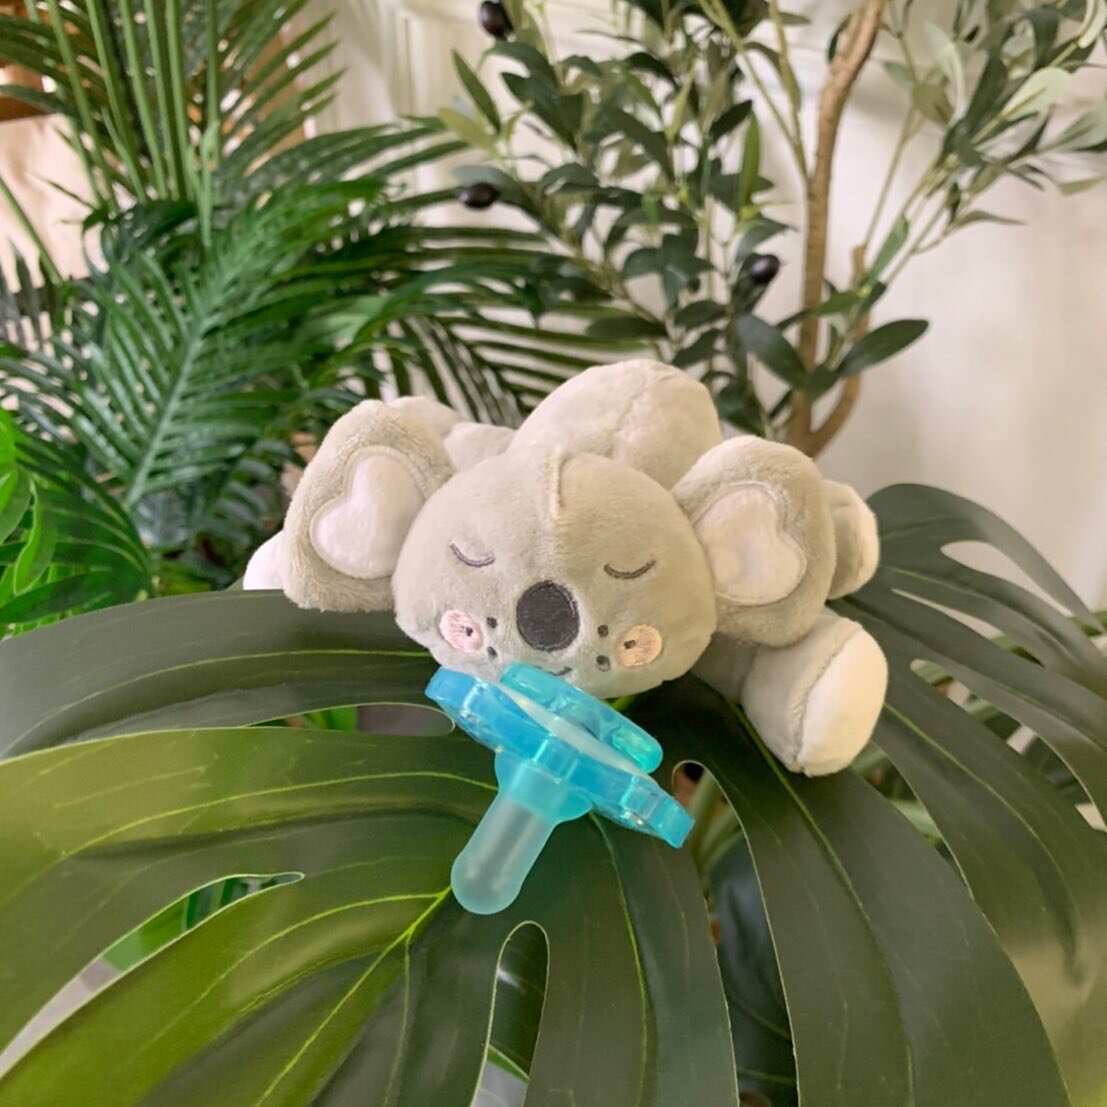 Koala is a symbol of relaxation, so its sighting is a reminder that you need to take some time for yourself.

And they smell like eucalyptus.

#queeby #queebybaby #babyphotography #babyphotoshoot #babyproducts #babypanda #pandababy #babytoys